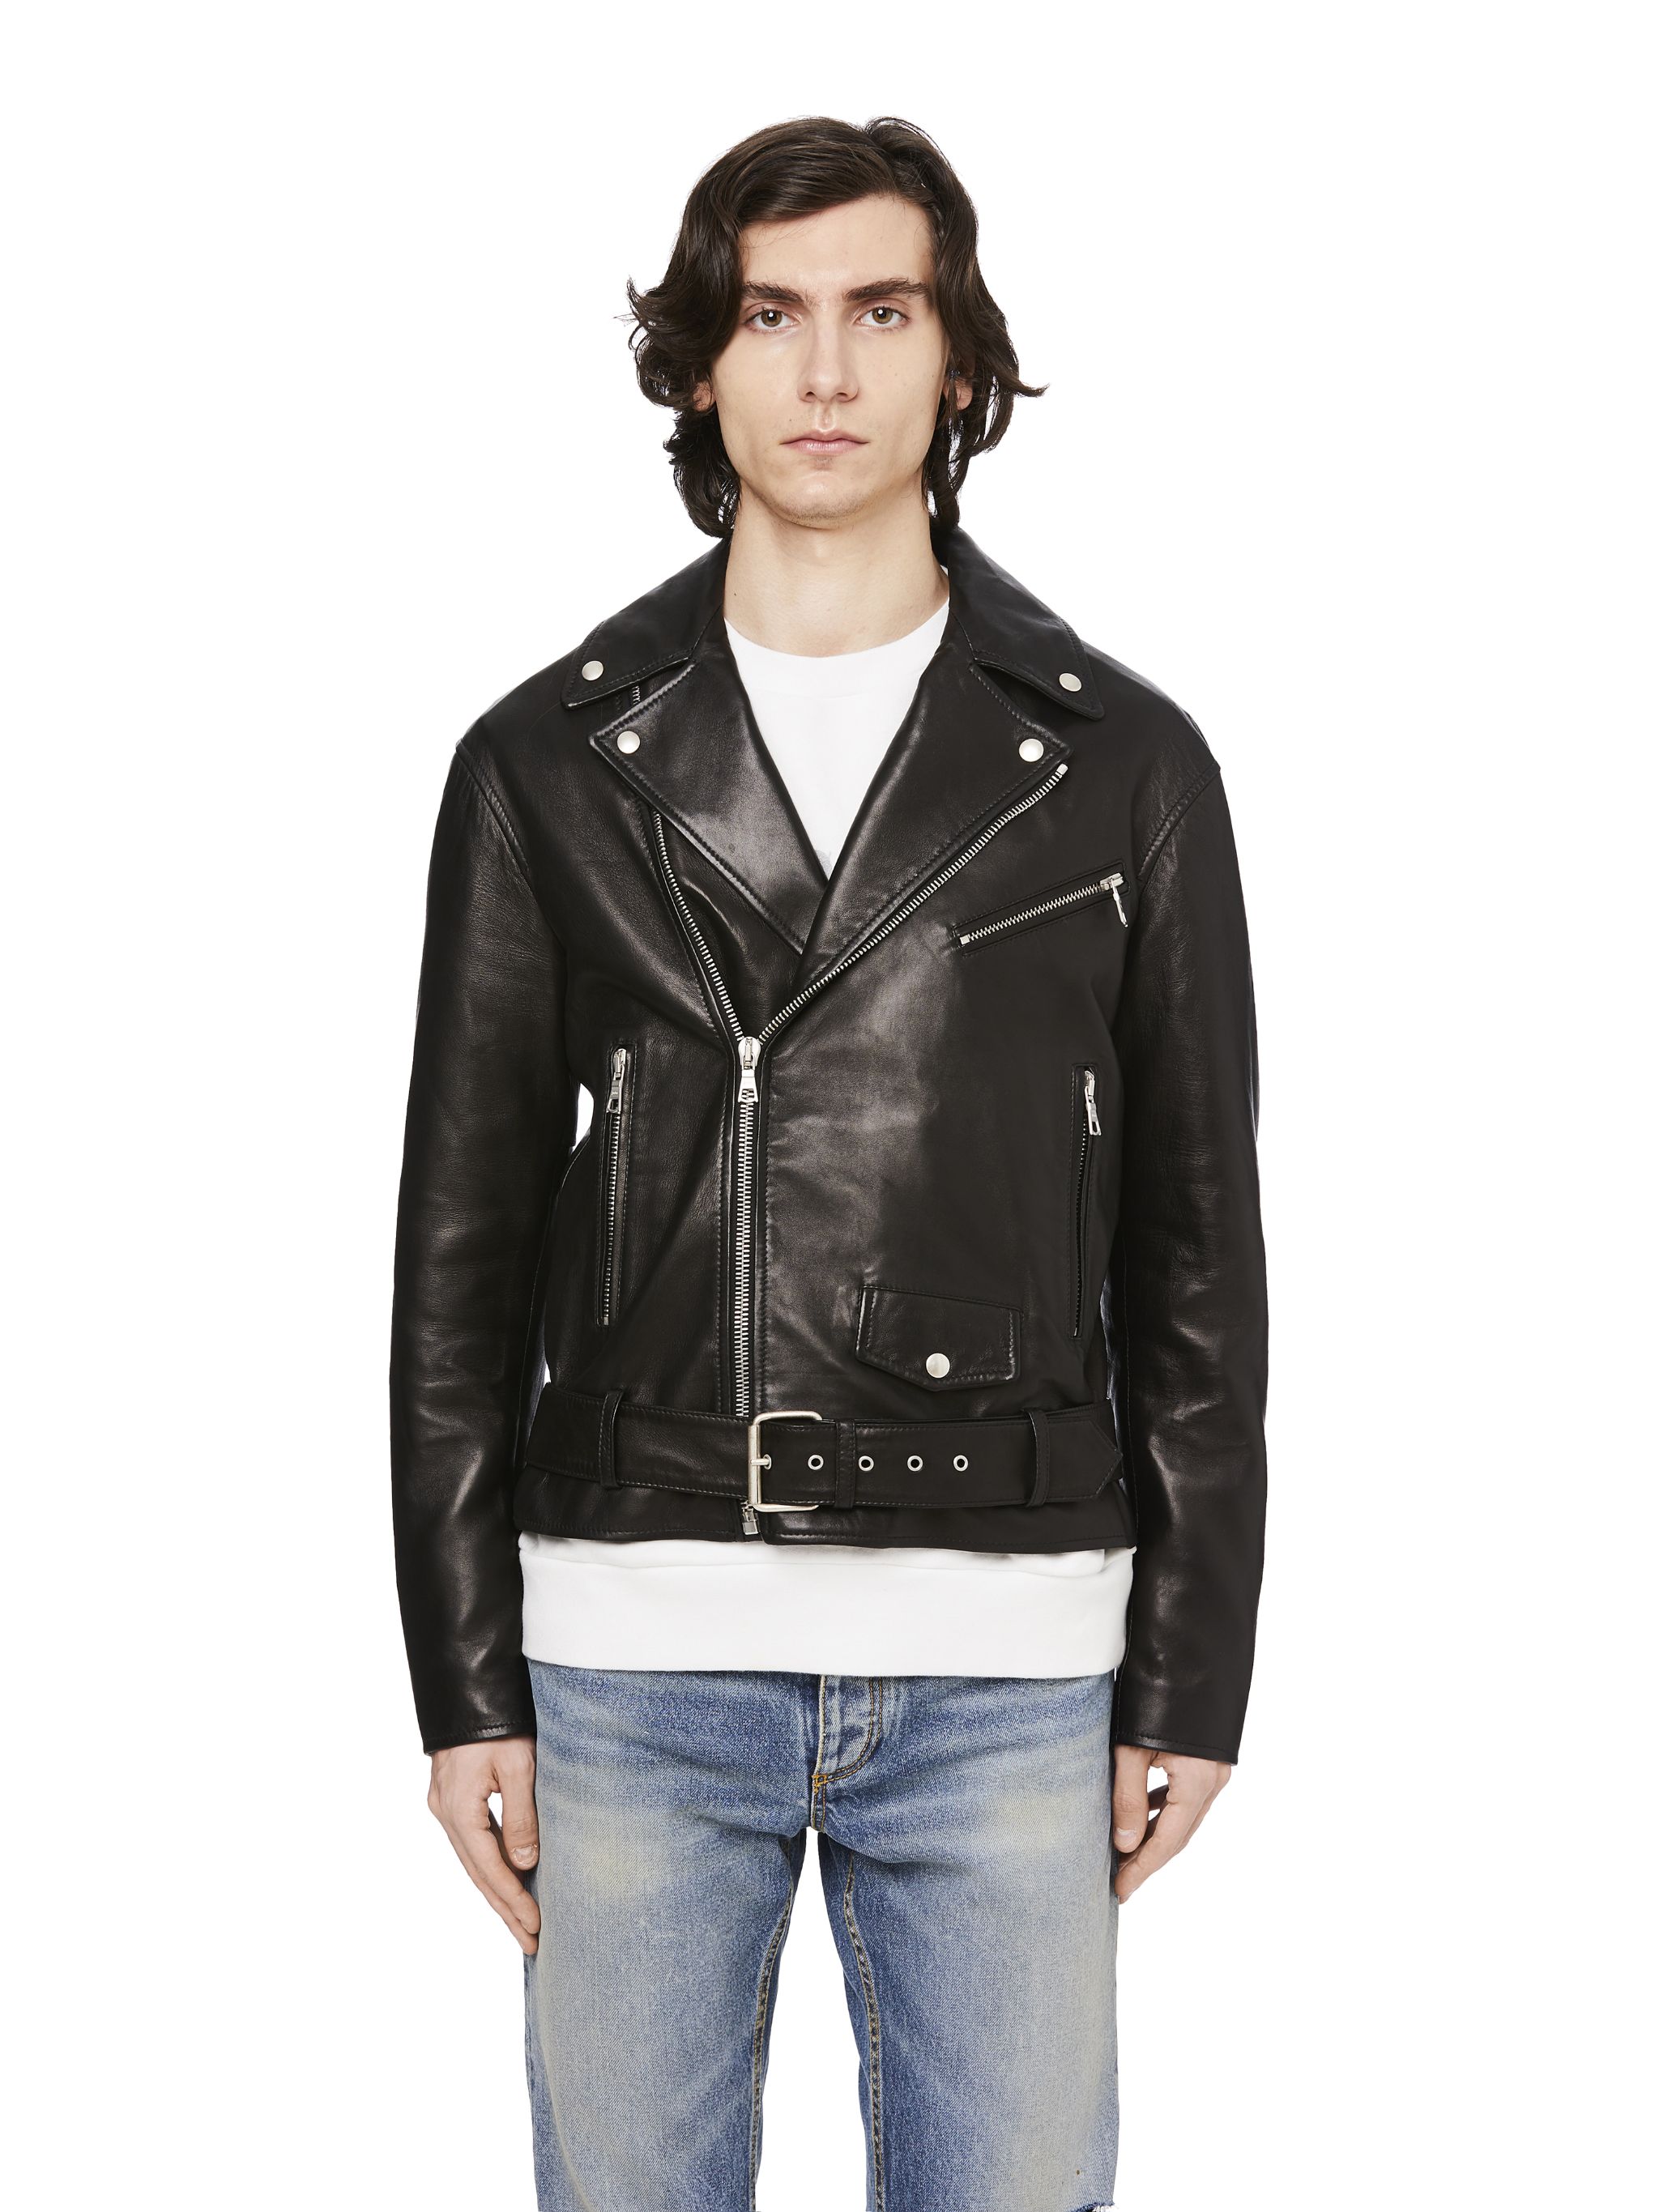 LOGO LEATHER JACKET in black - Palm Angels® Official